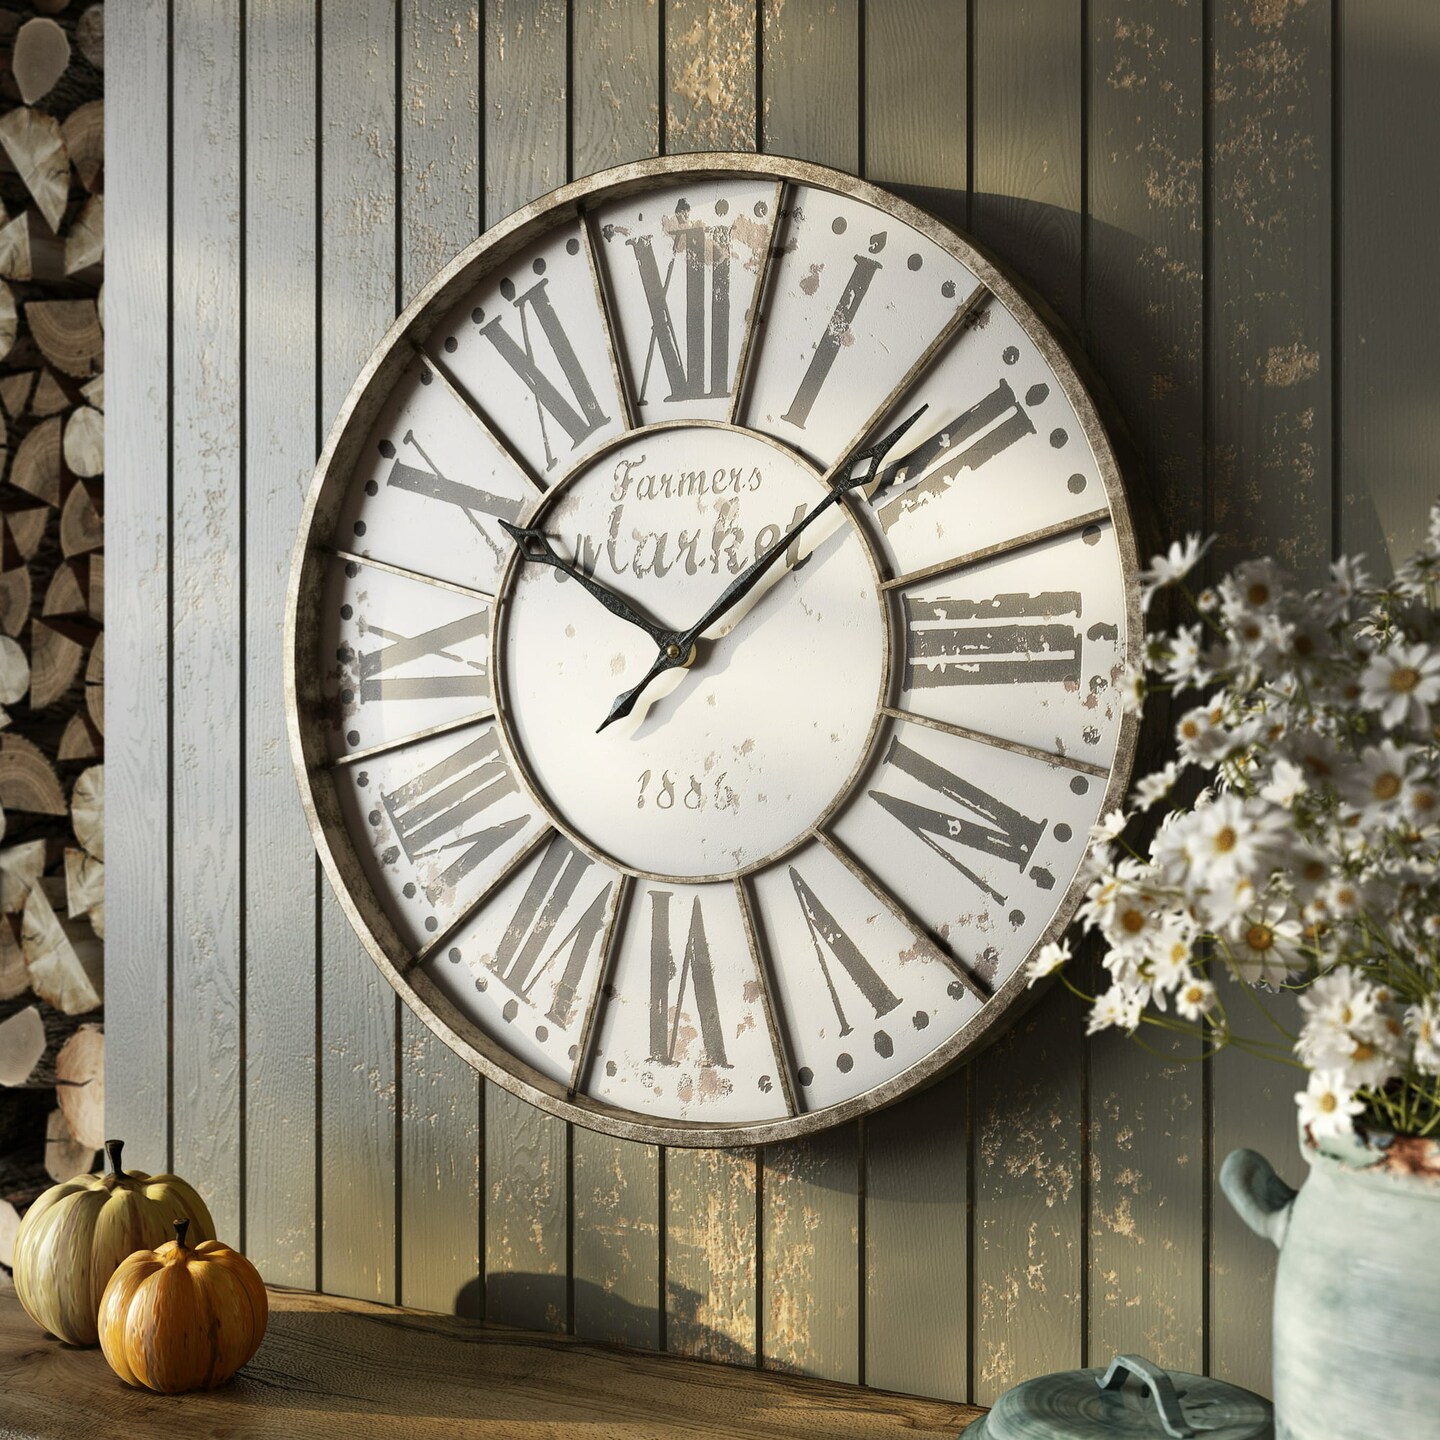 Aspire Home Accents Monroy Rustic Farmhouse 24 in. Wall Clock